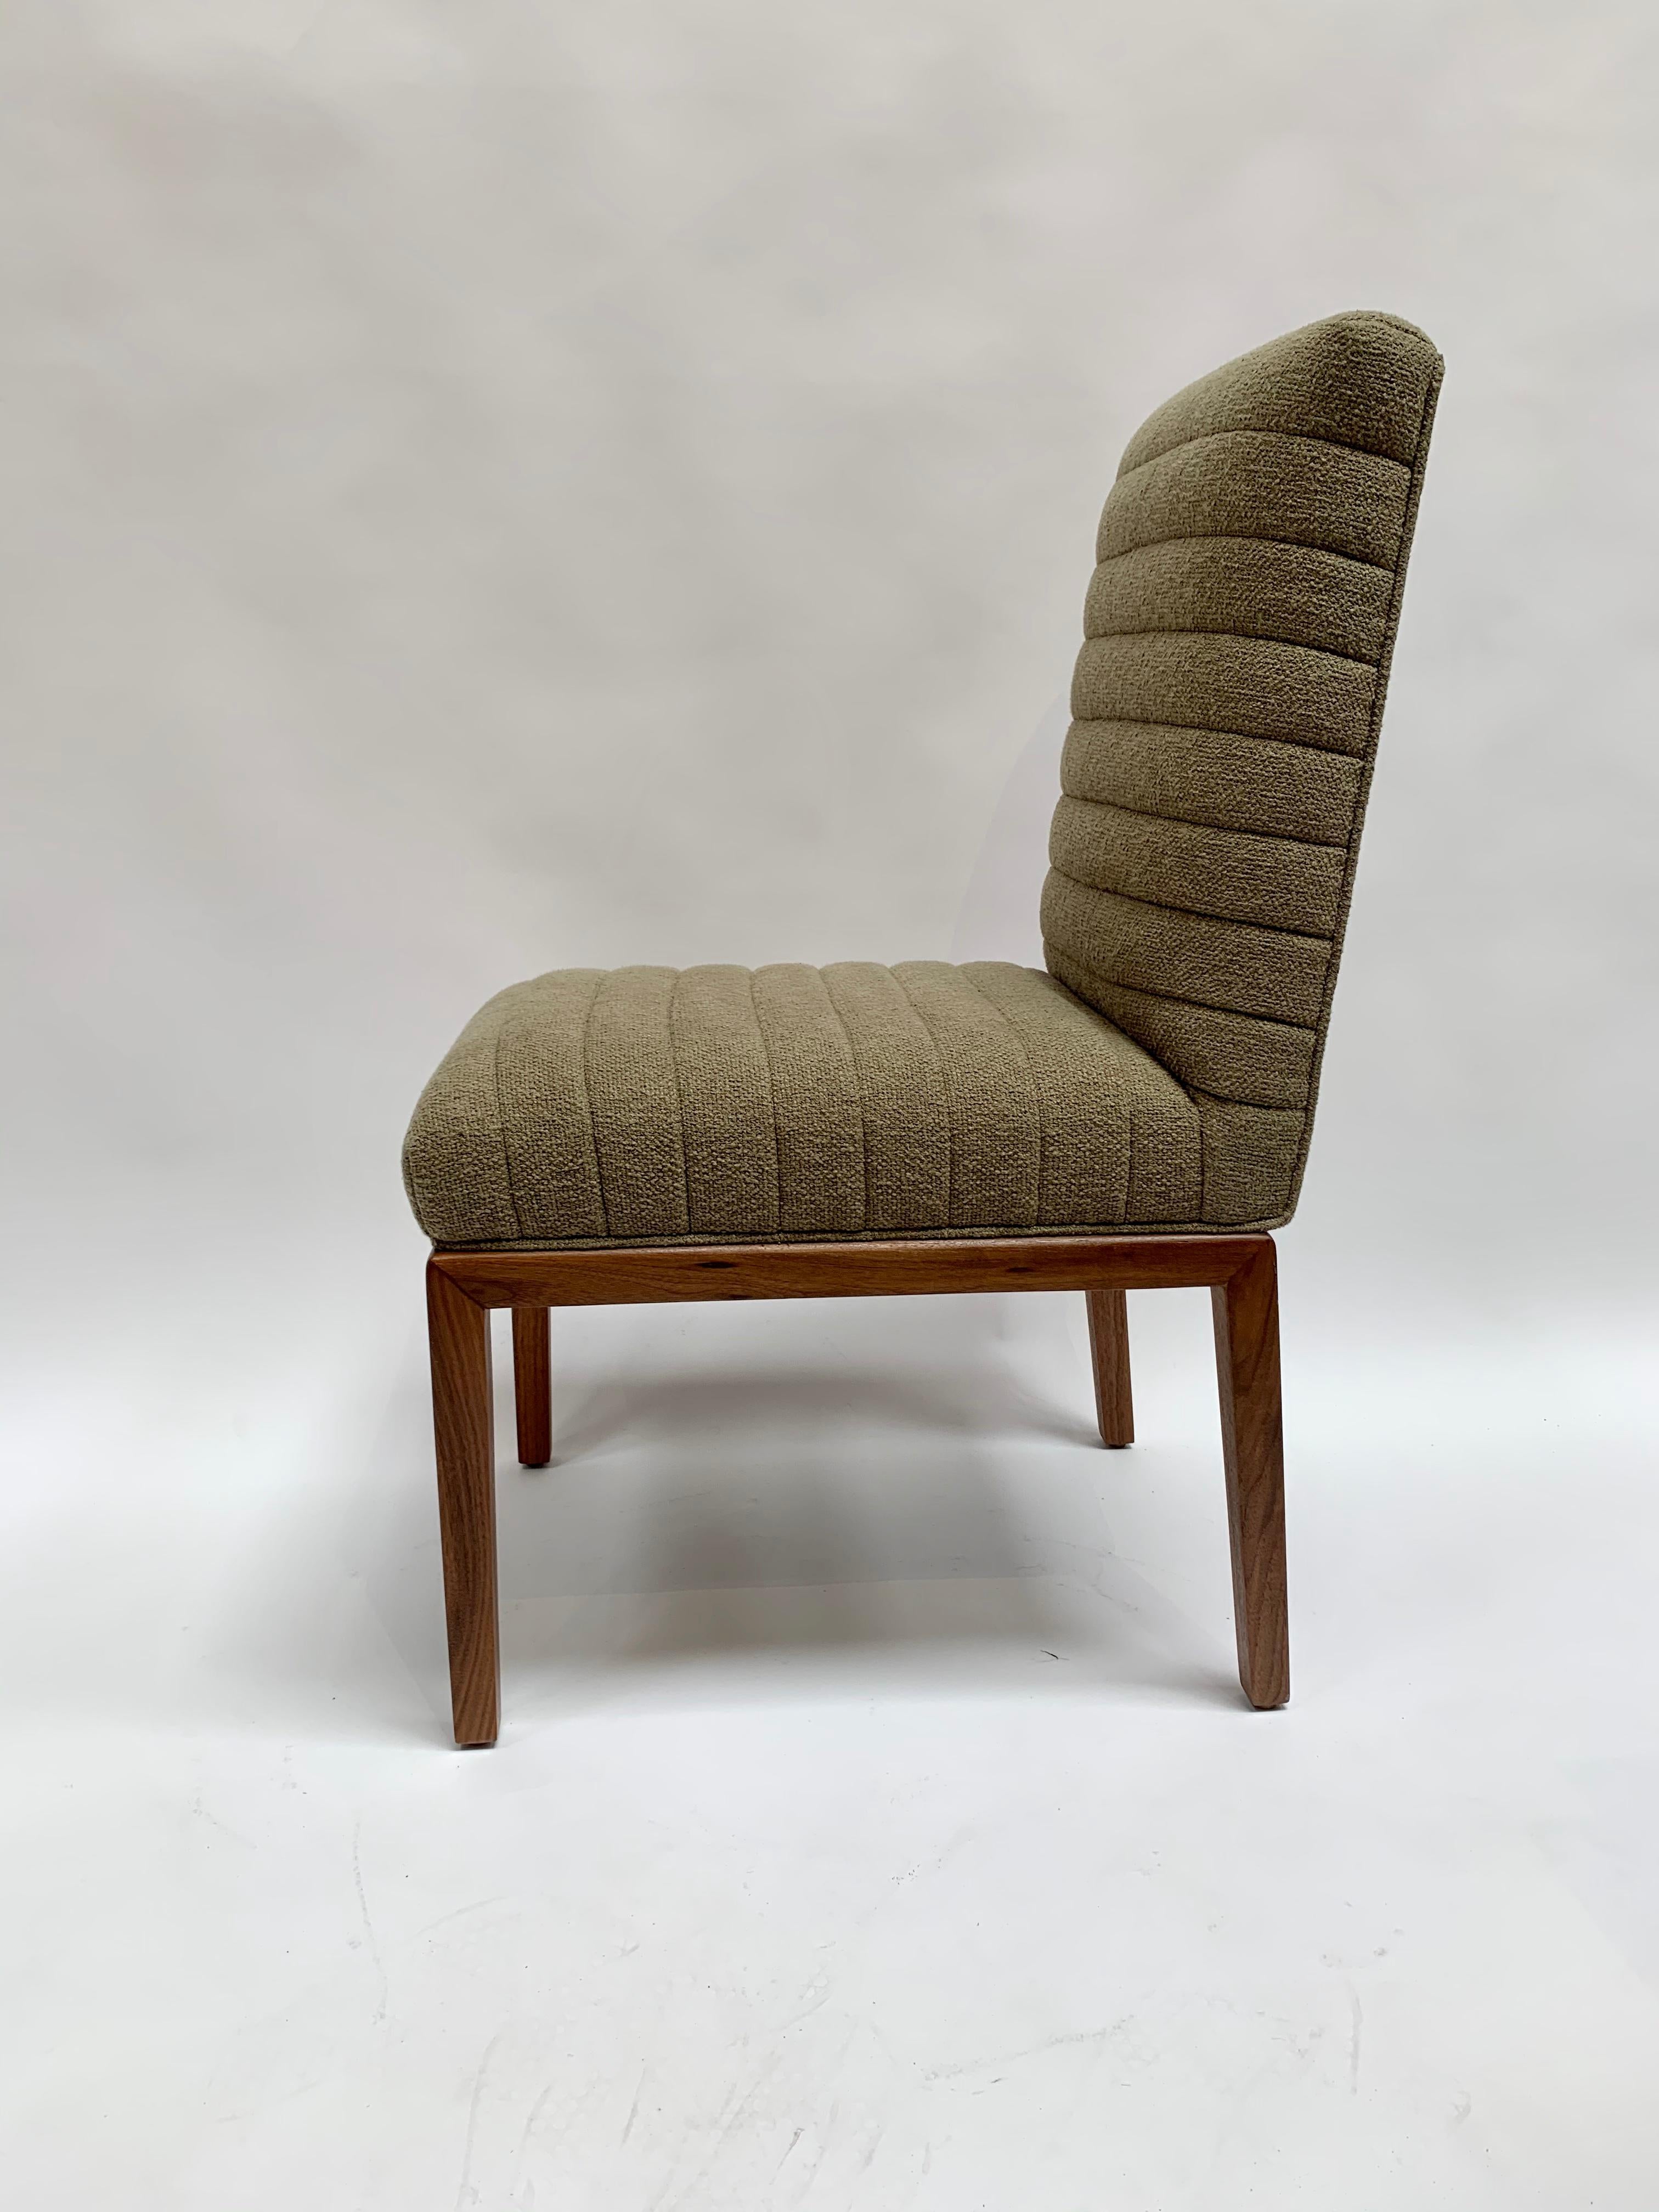 Carved Green Highback Shoreland Chair by Brian Paquette for Lawson-Fenning, In Stock